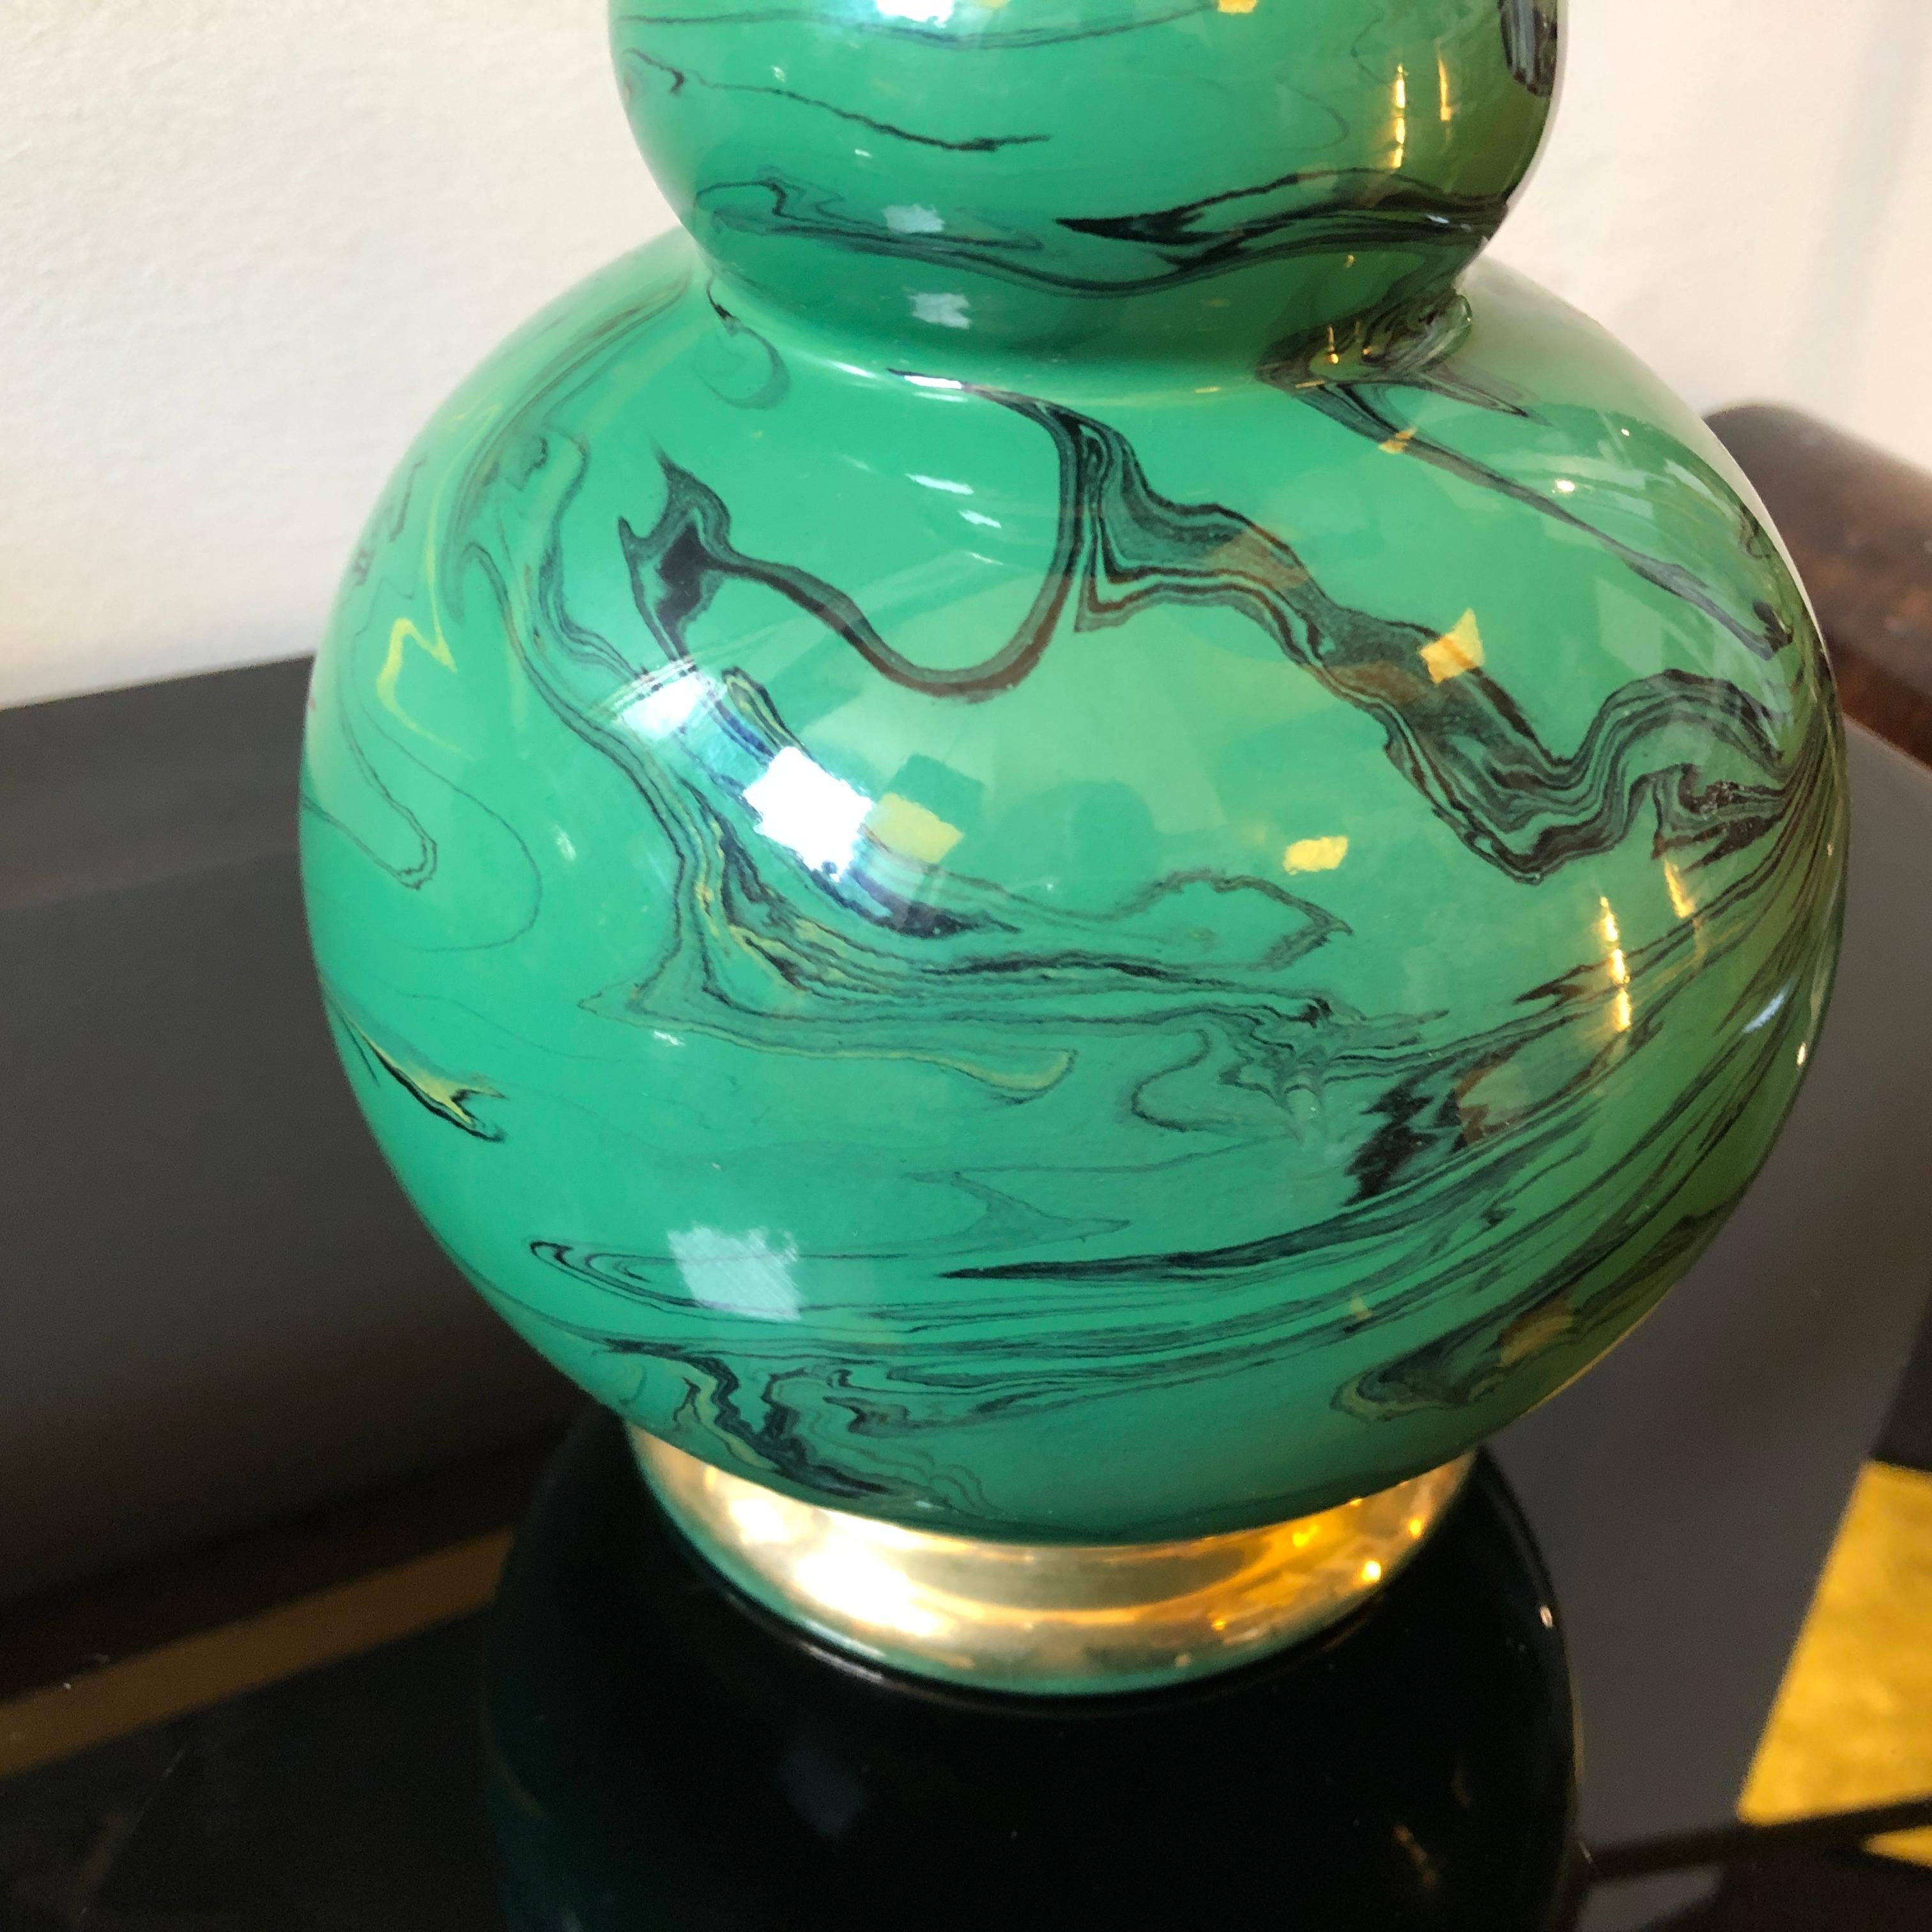 It's a gold and green malachite effect ceramic vase made in Italy in the 1950s by Batignani in Florence.